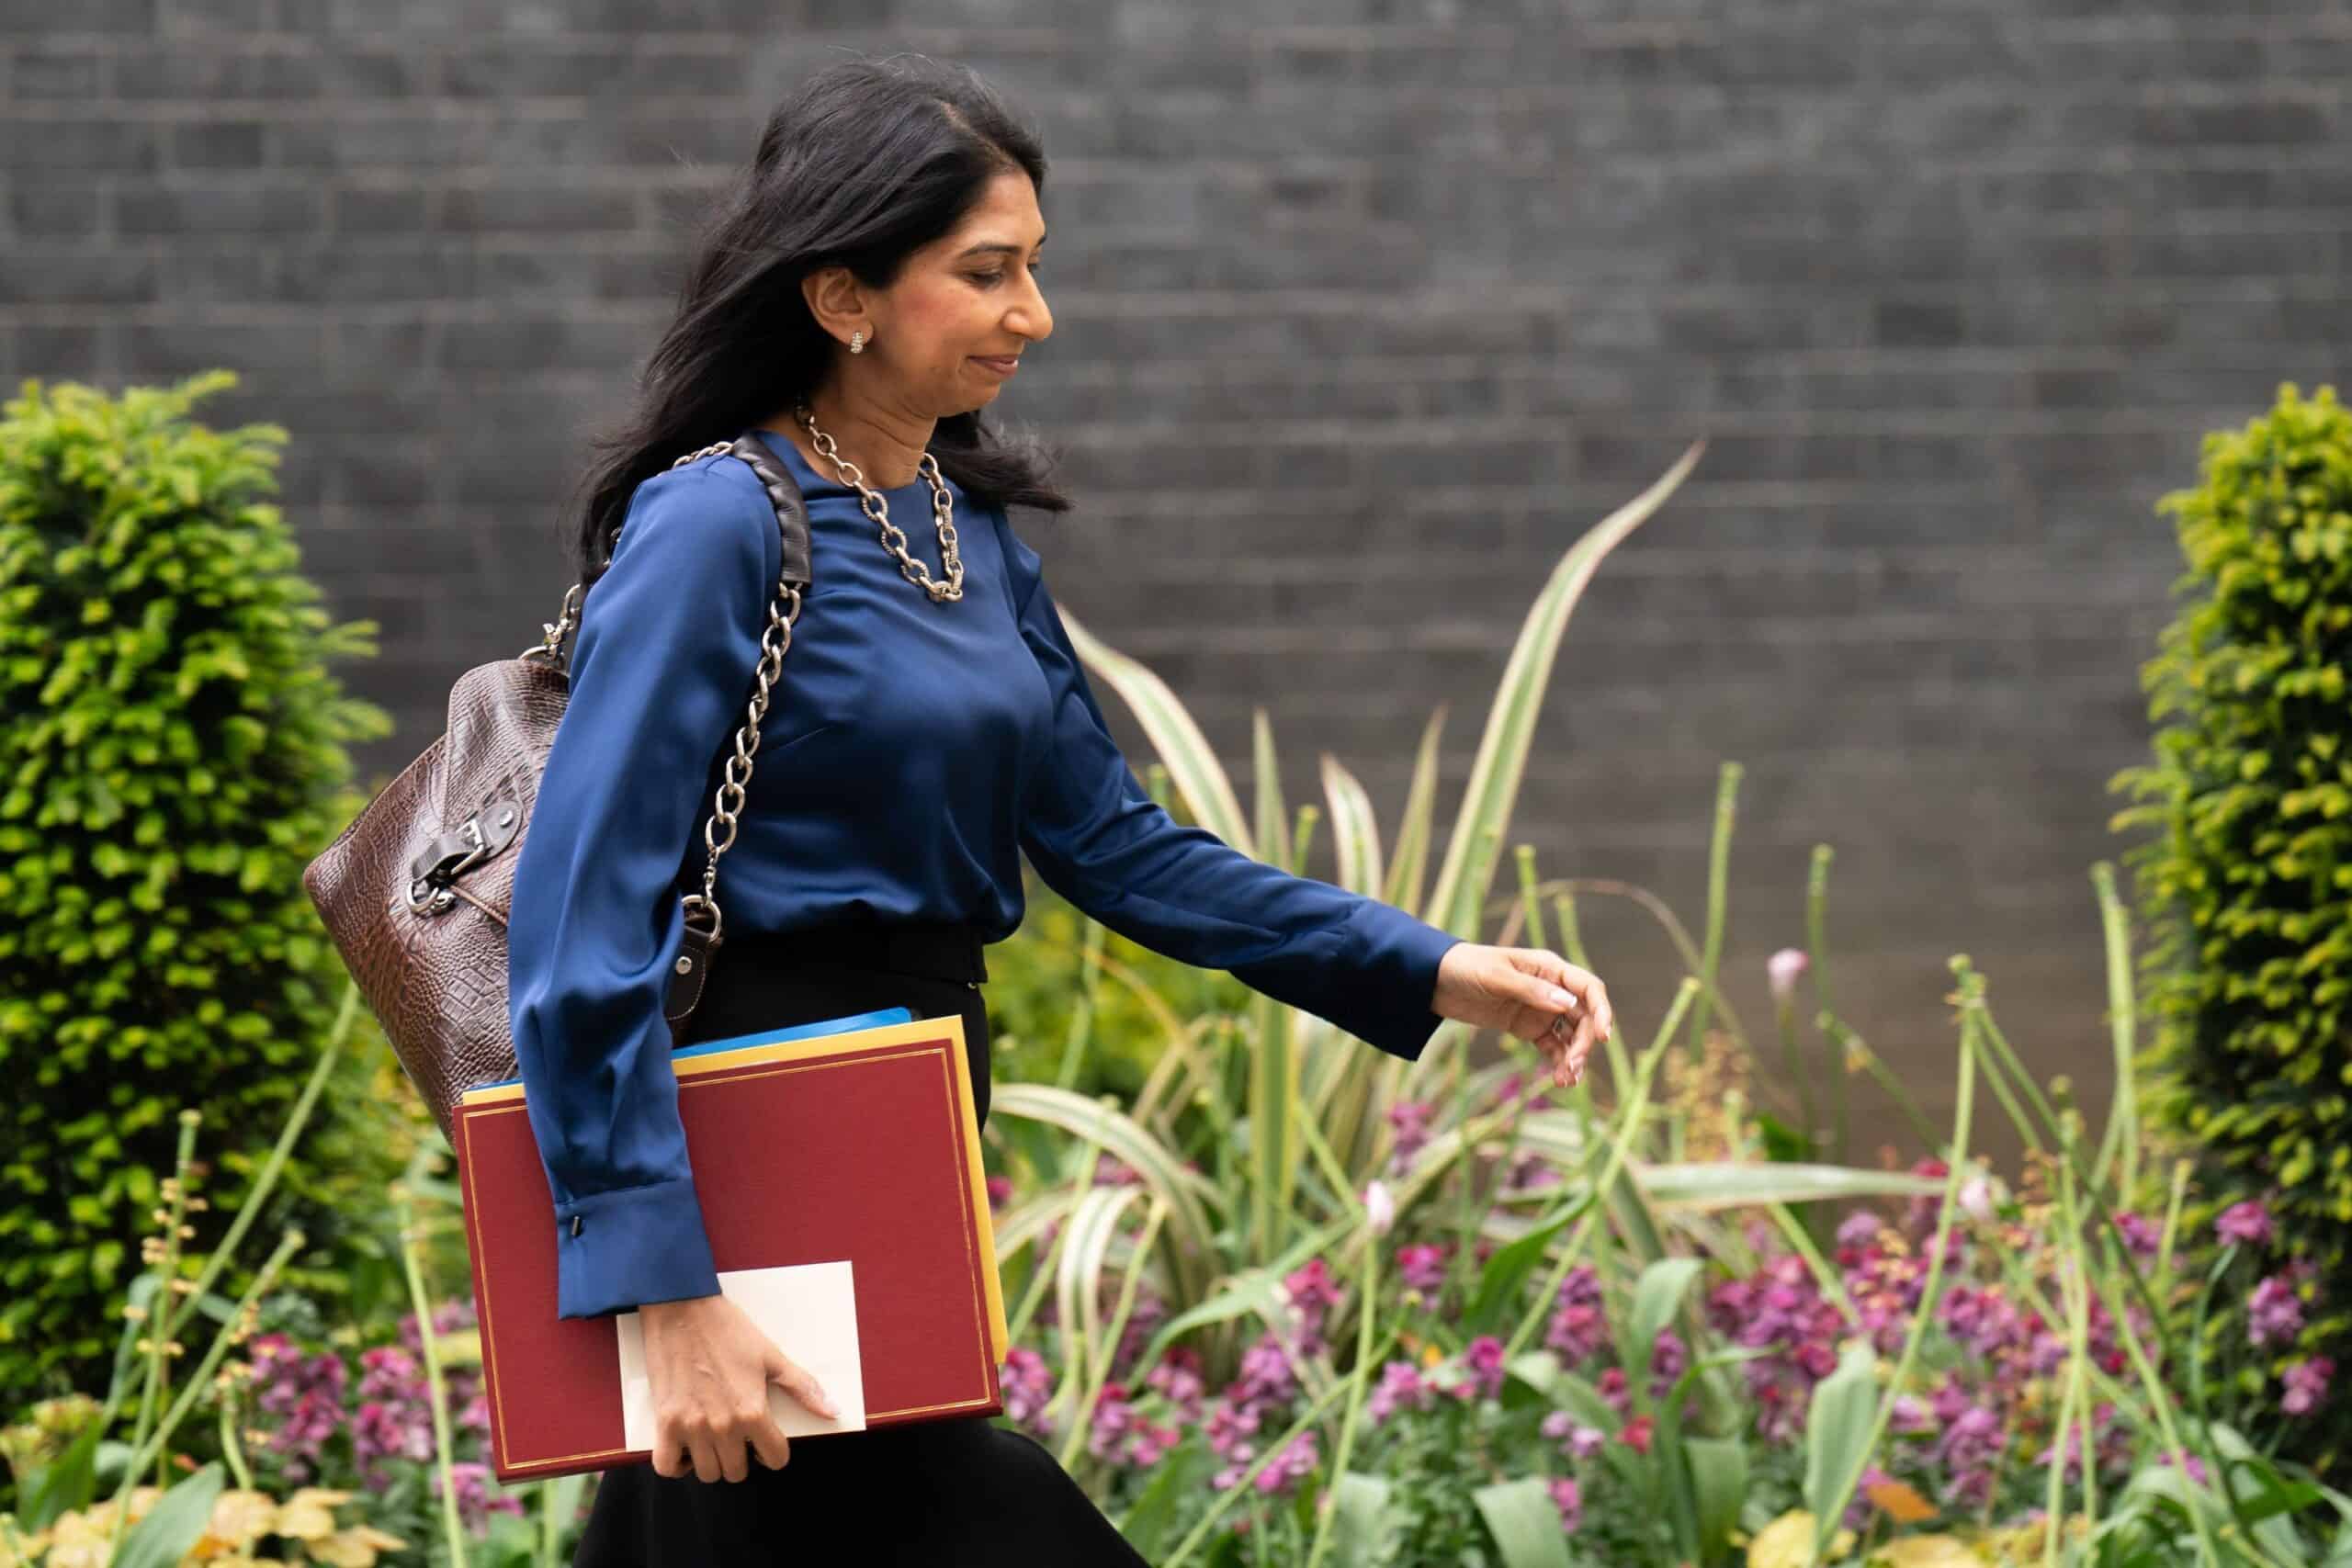 Foreign students will be barred from bringing dependents to UK in migration curb